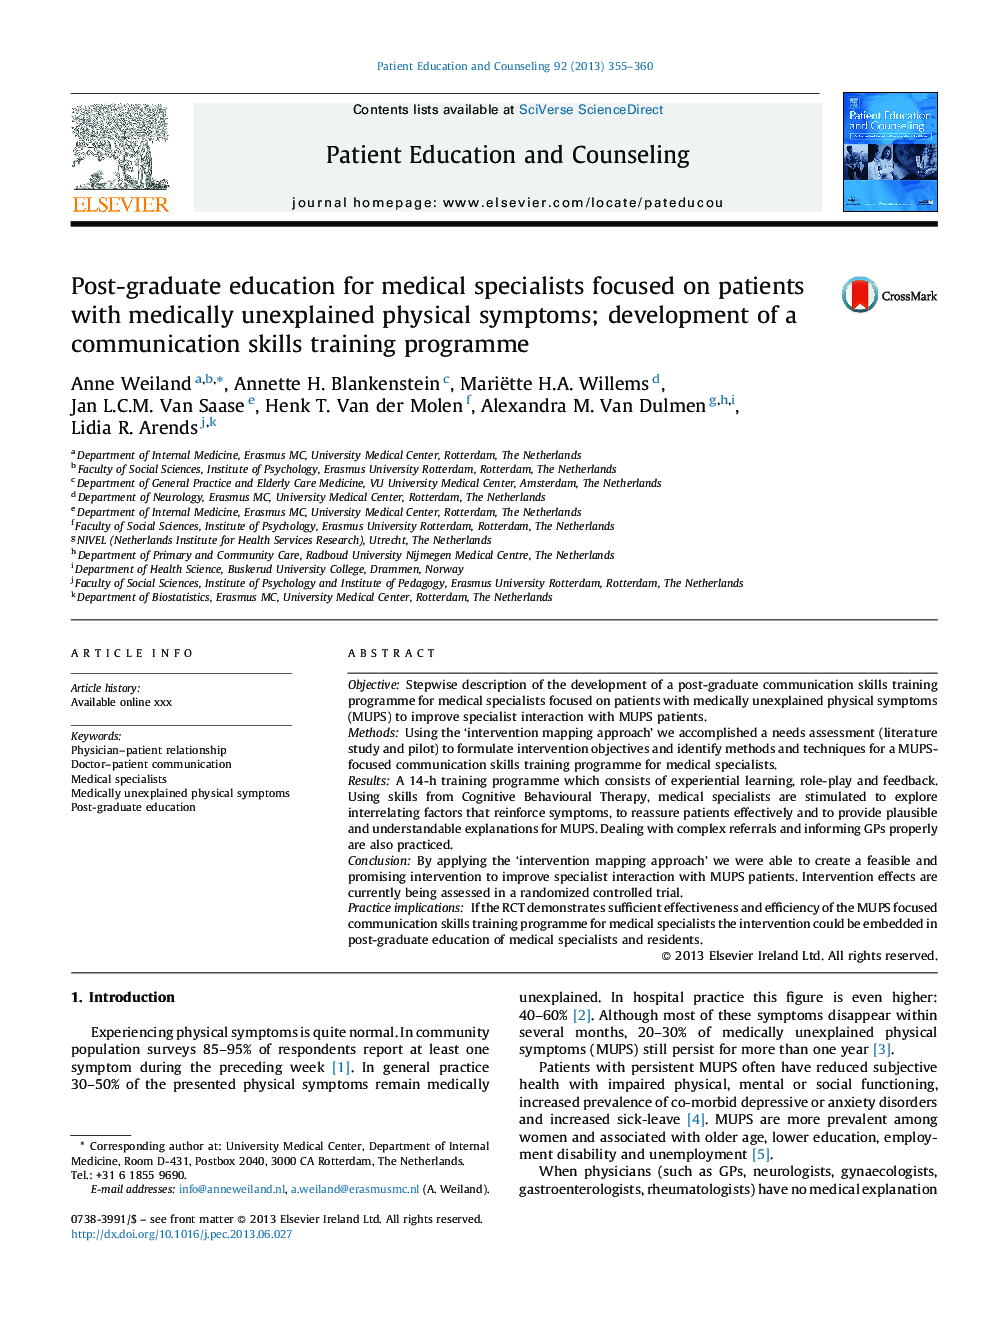 Post-graduate education for medical specialists focused on patients with medically unexplained physical symptoms; development of a communication skills training programme